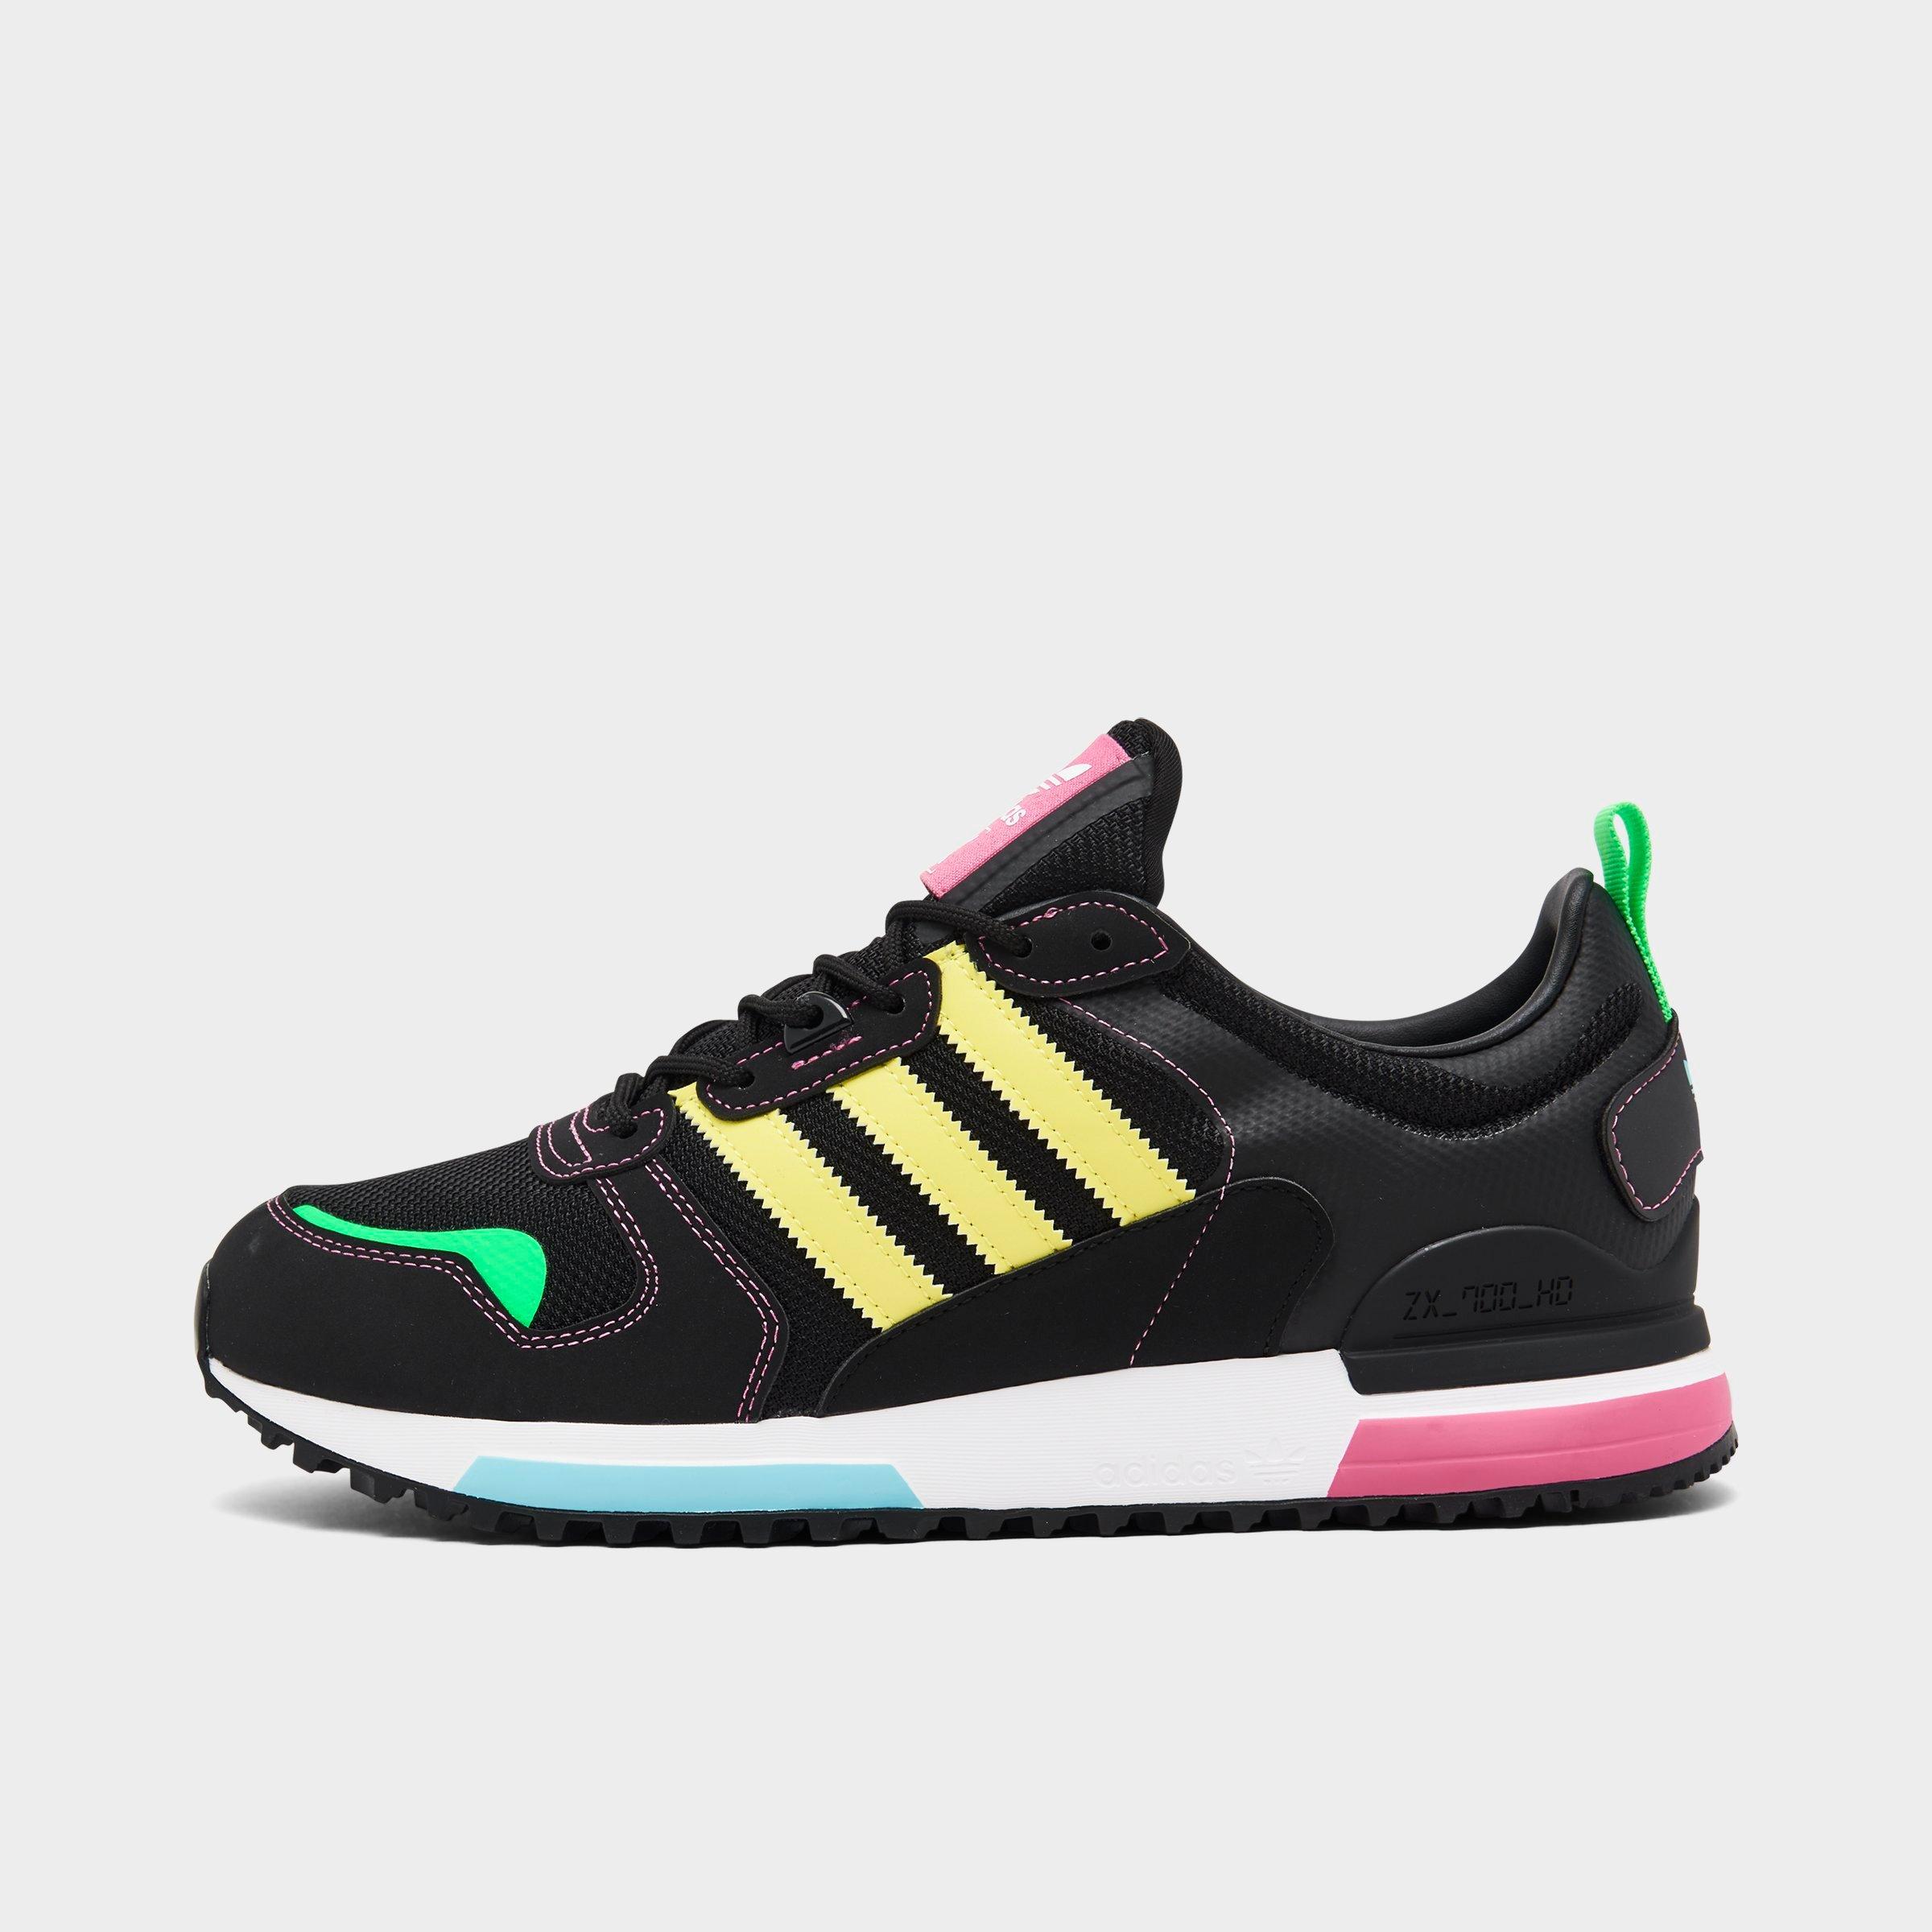 adidas ZX 700 HD Casual Shoes| JD